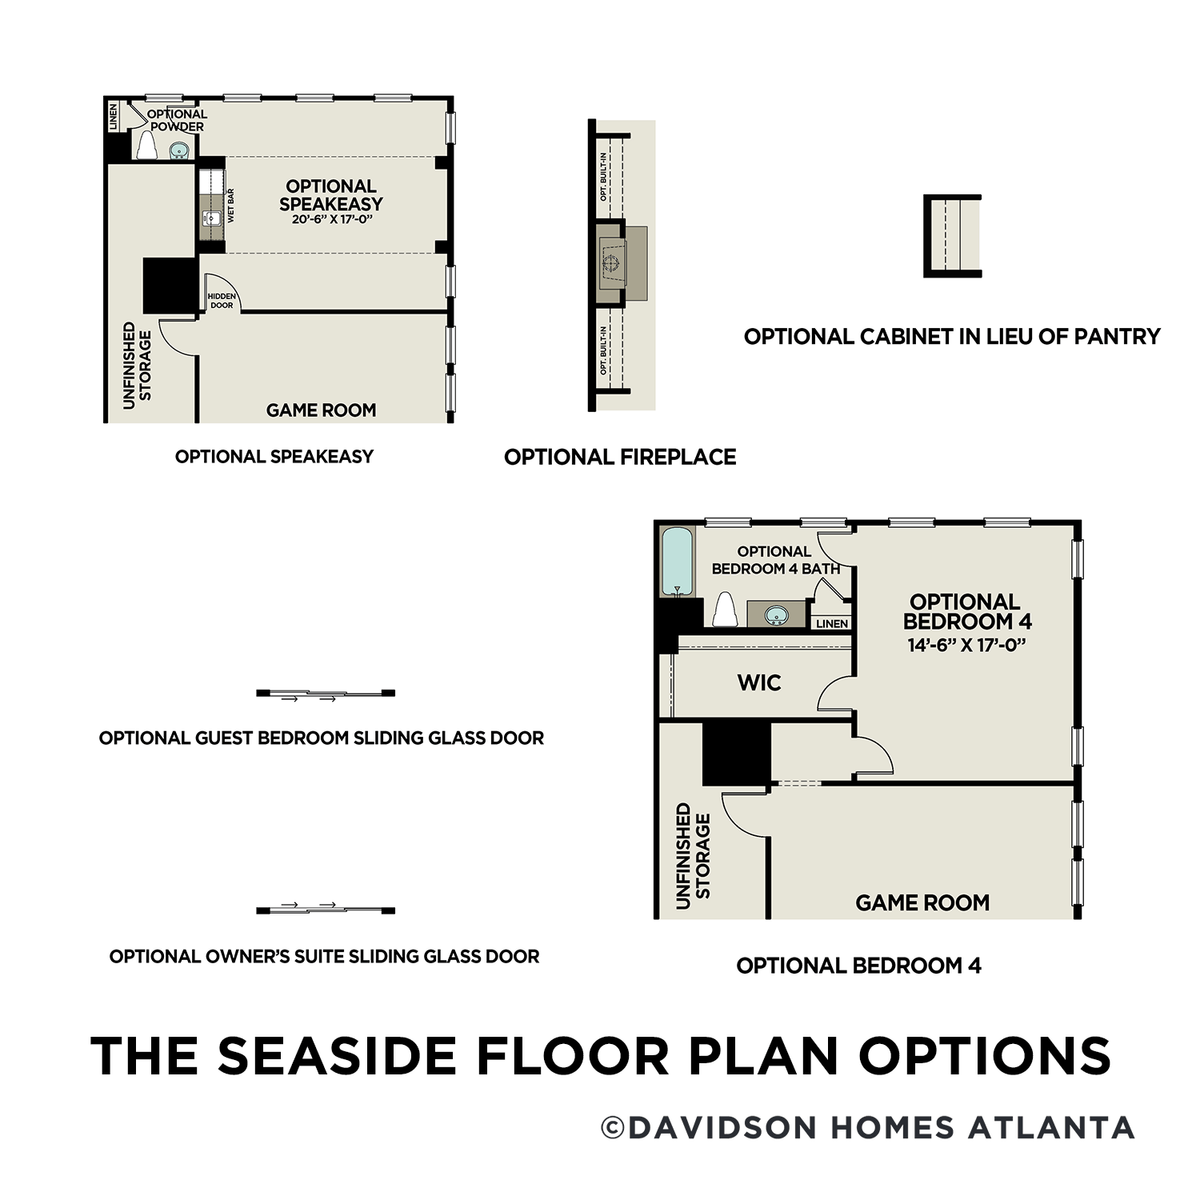 3 - The Seaside A floor plan layout for 412 Falling Water Avenue in Davidson Homes' The Village at Towne Lake community.